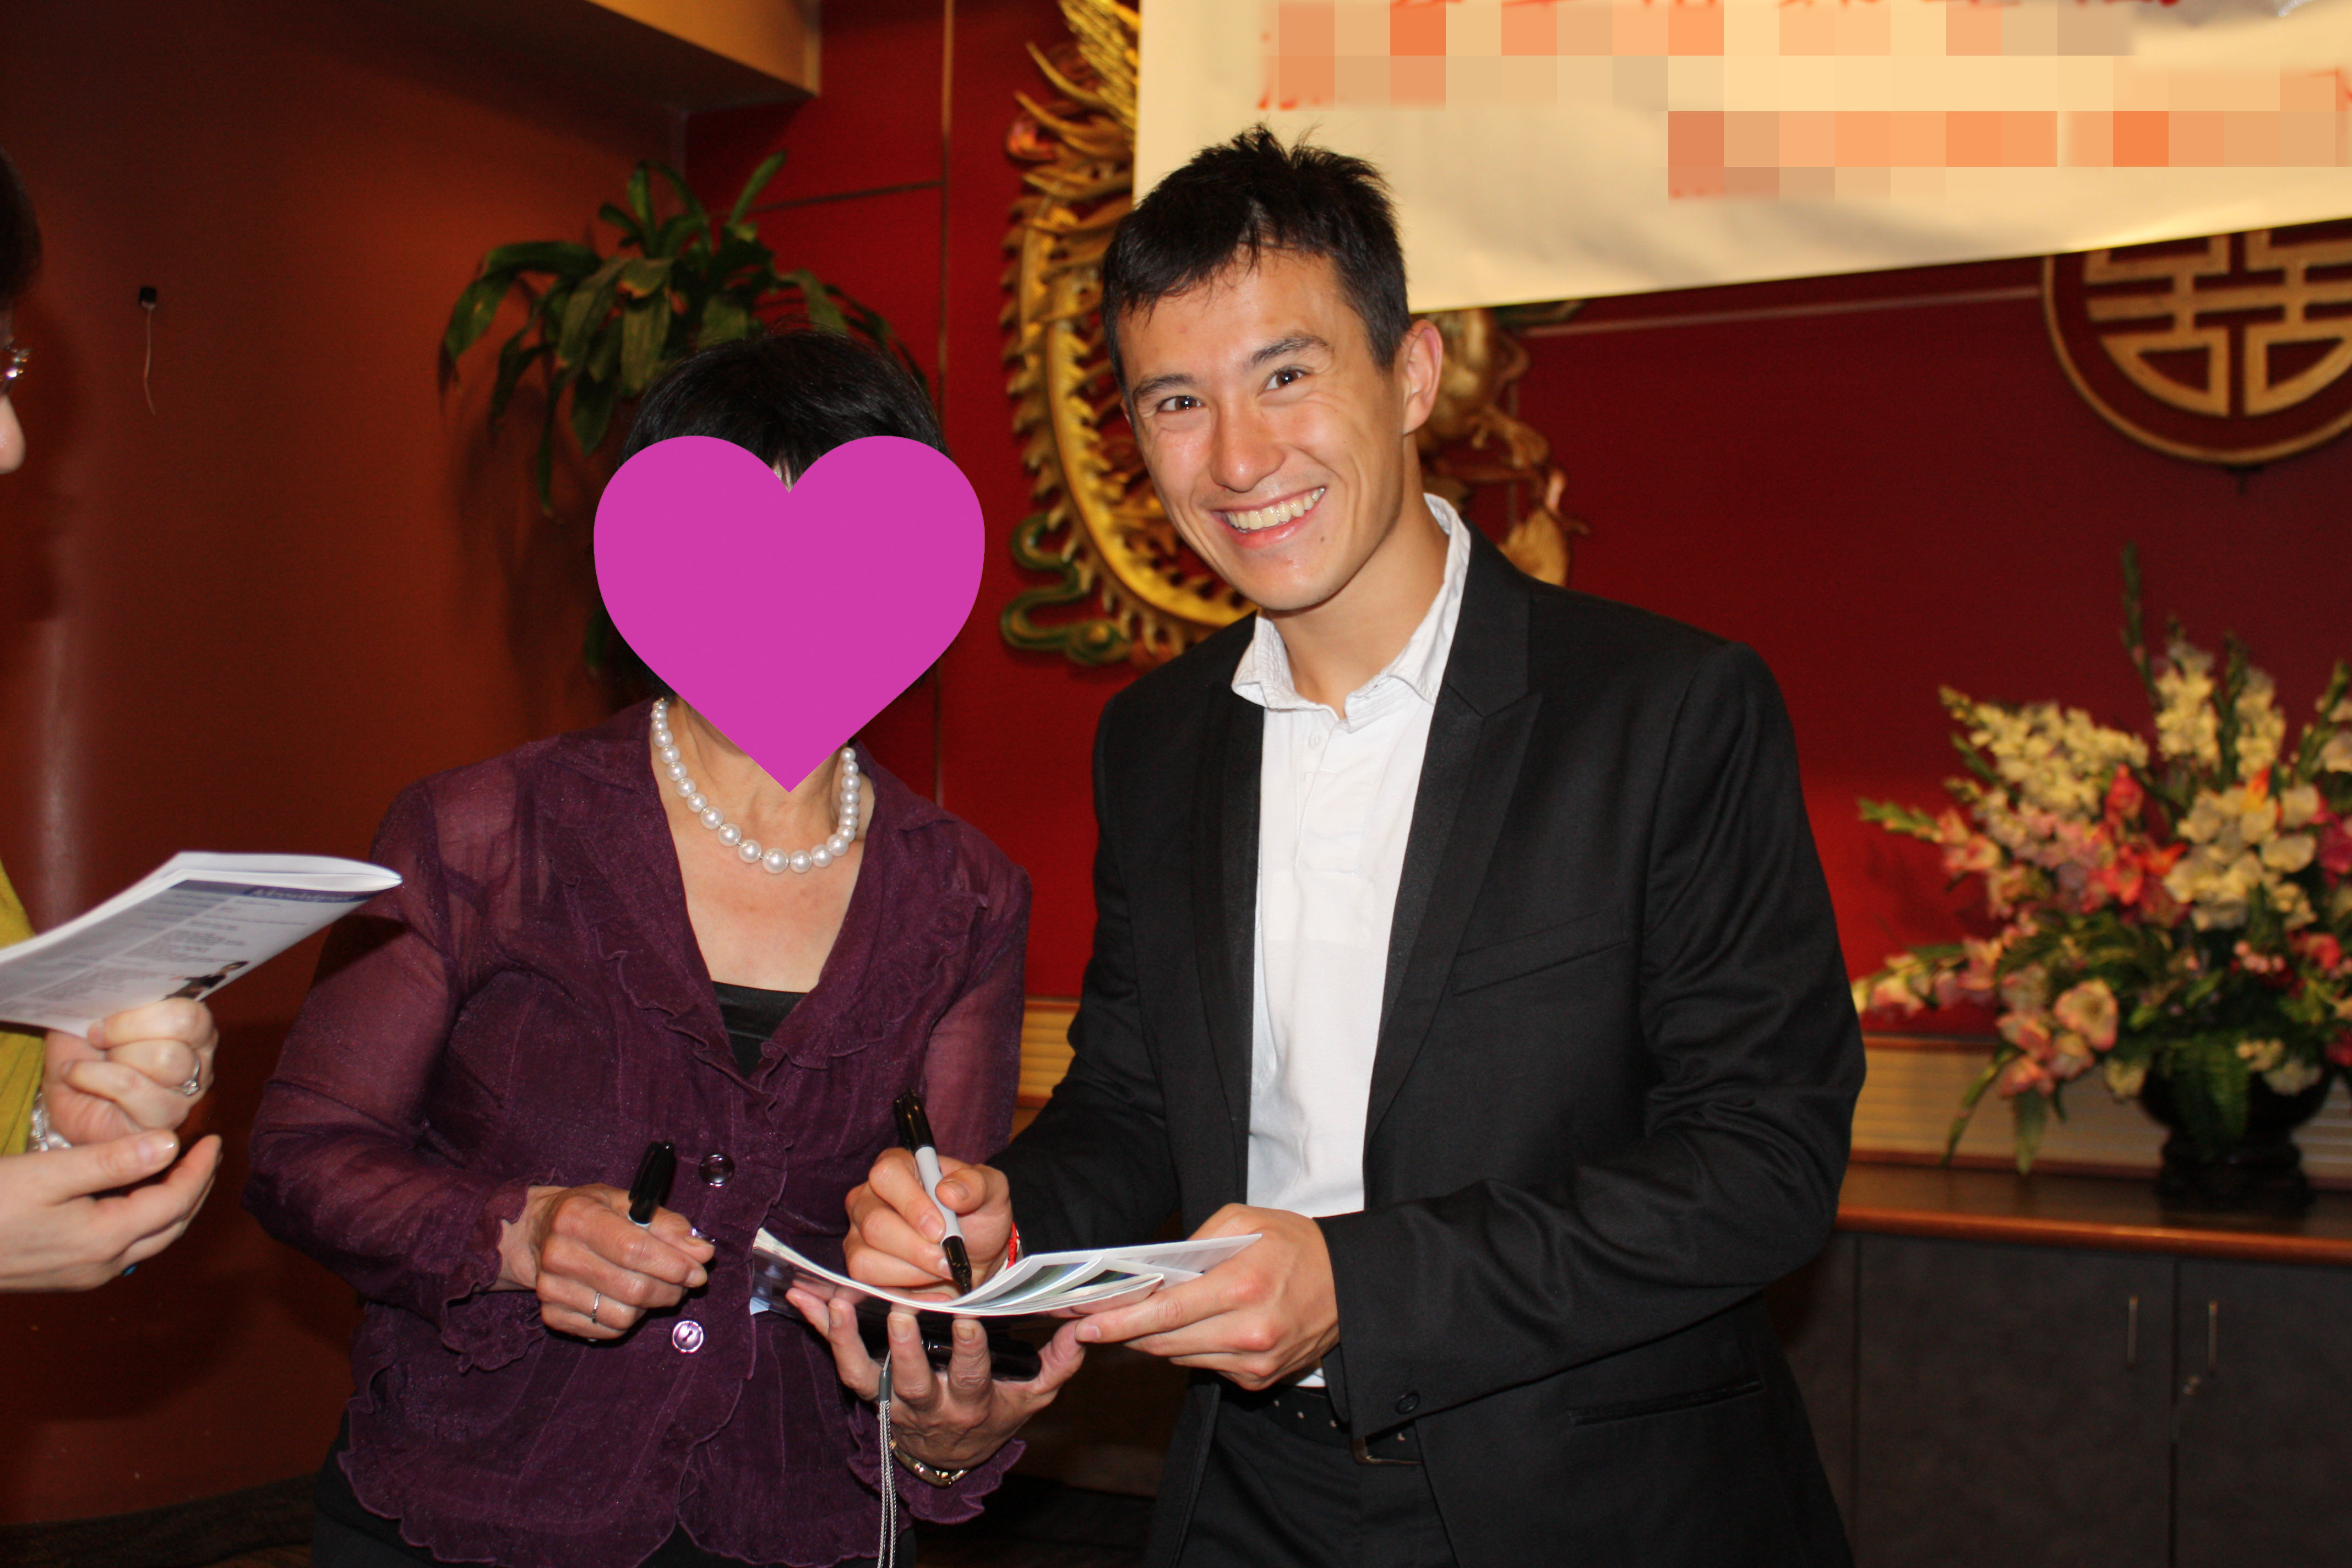 Patrick Chan fan Happylife getting his autograph at a fundraising dinner, May 2012. He is smiling in the photo.